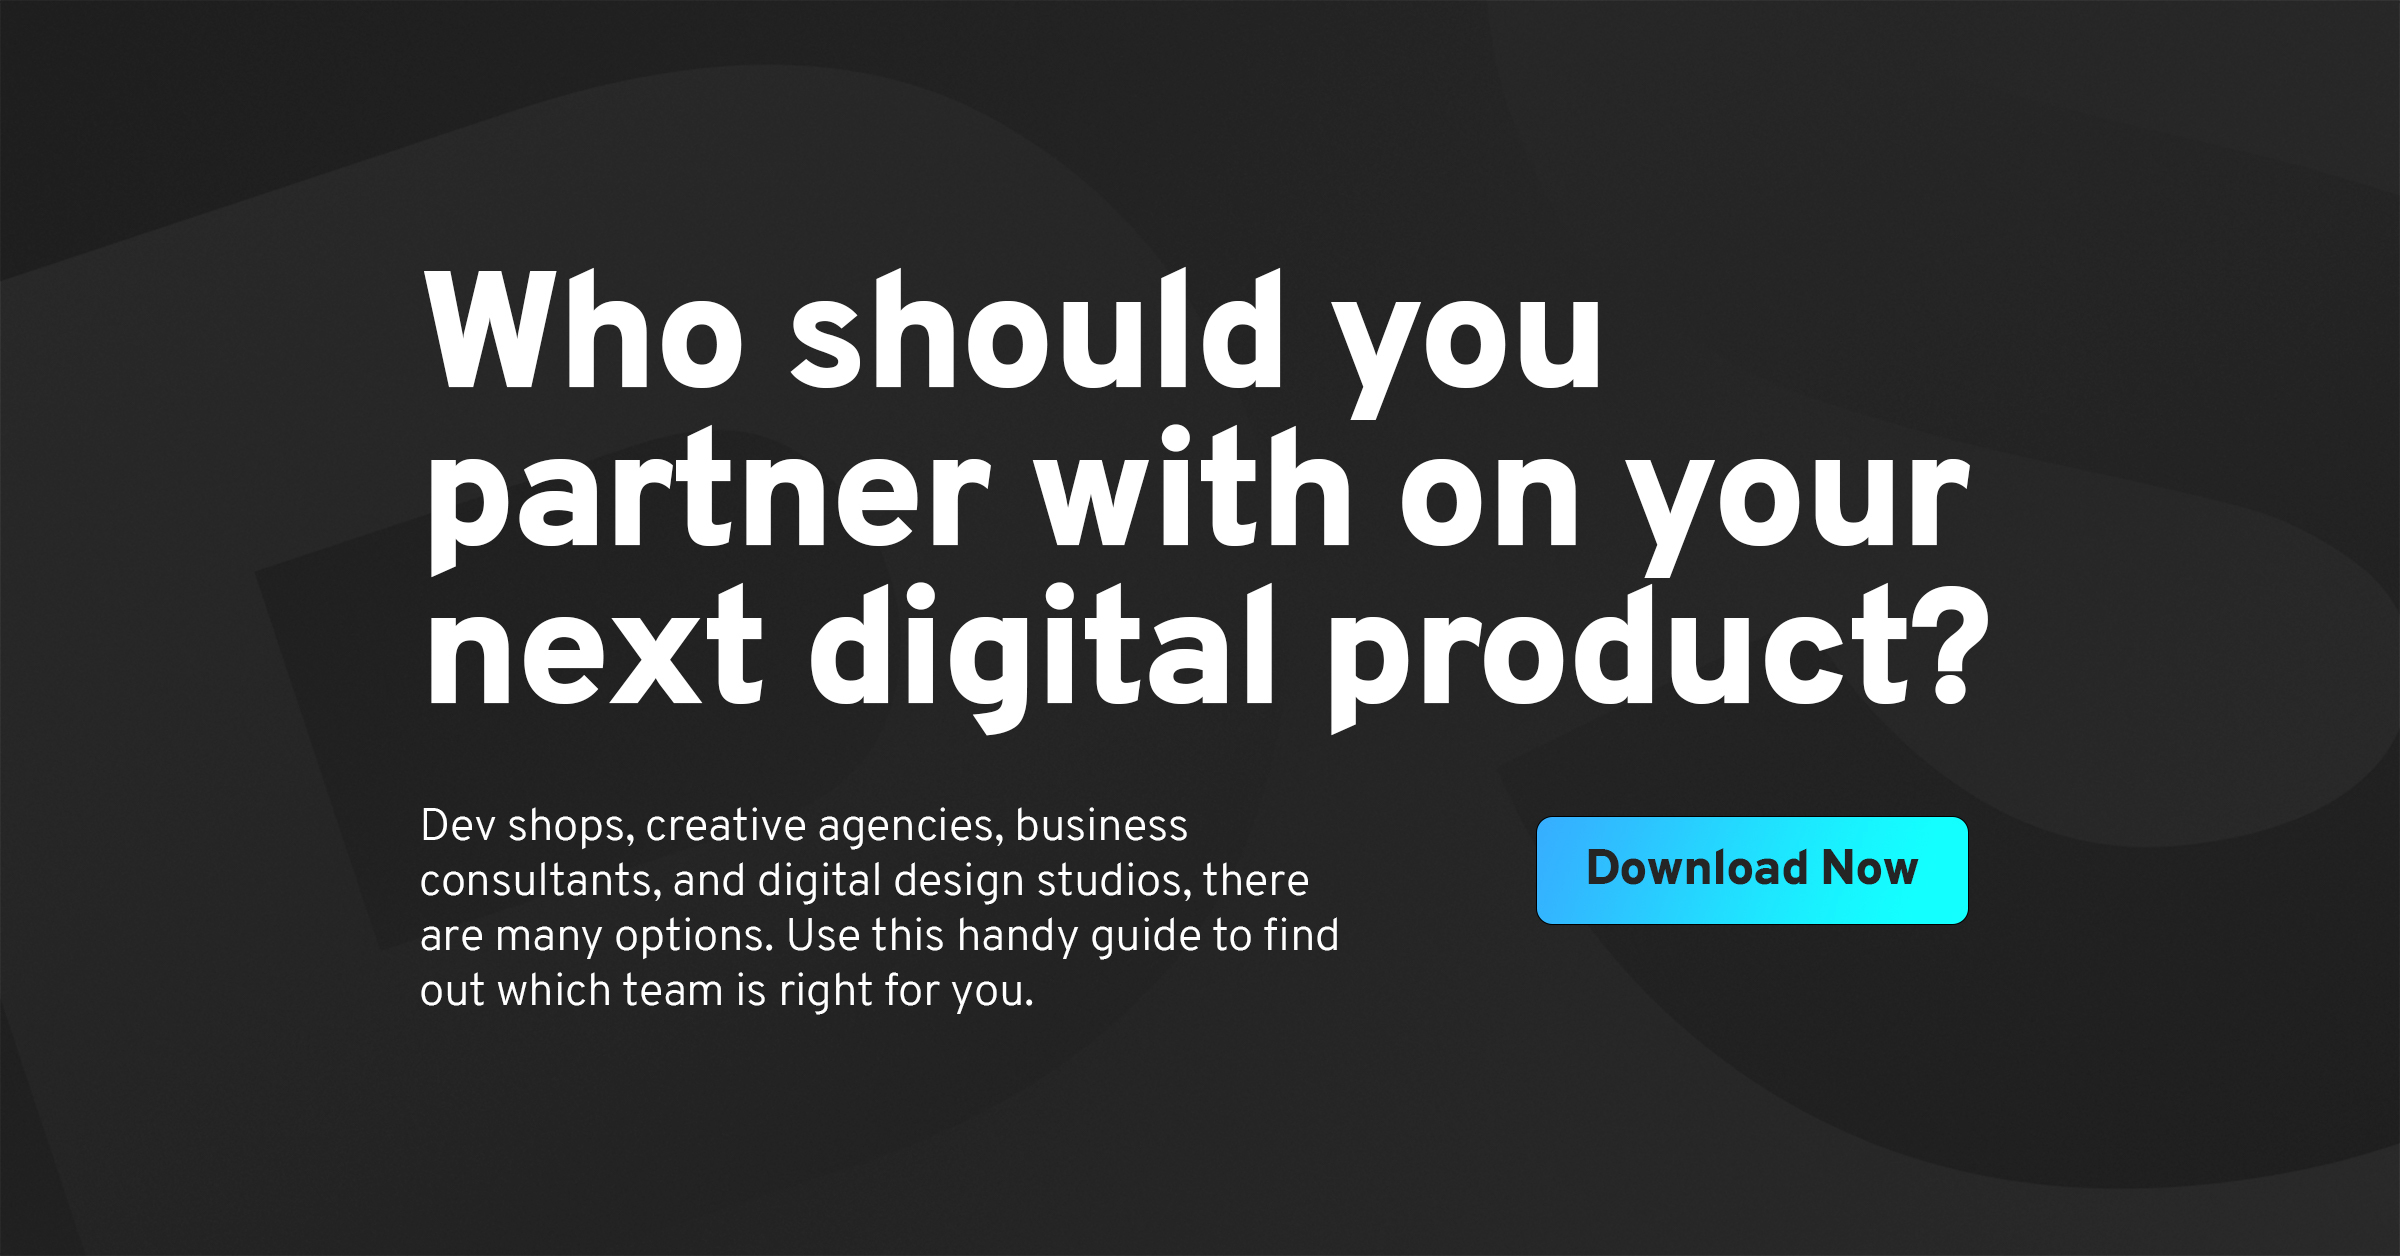 Who should you partner with on your next digital product?